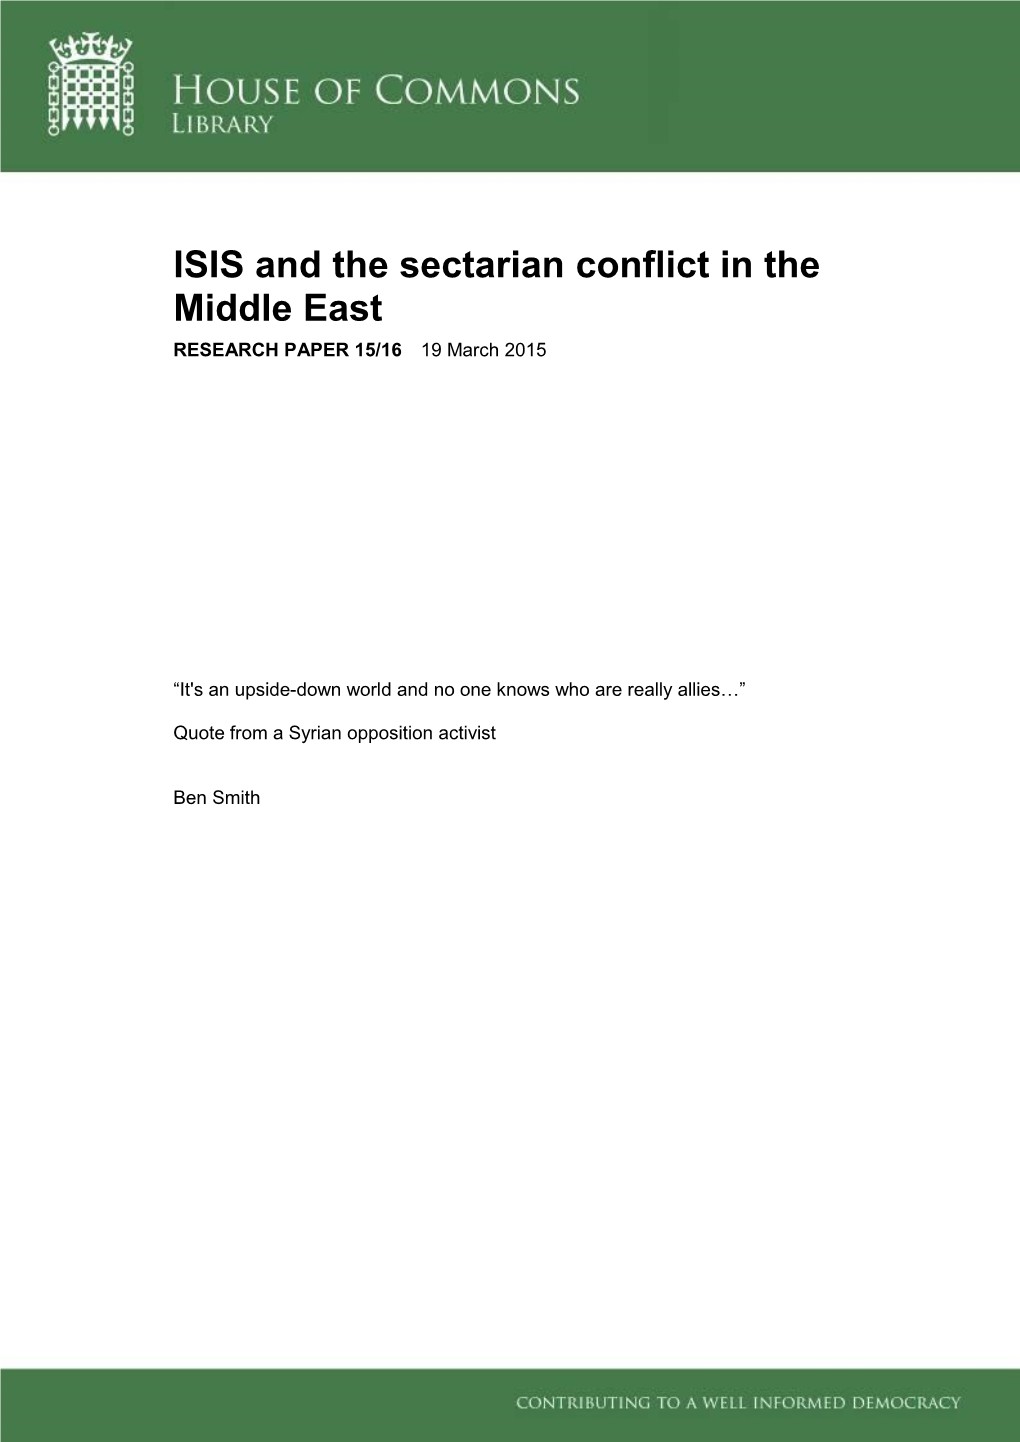 ISIS and the Sectarian Conflict in the Middle East RESEARCH PAPER 15/16 19 March 2015